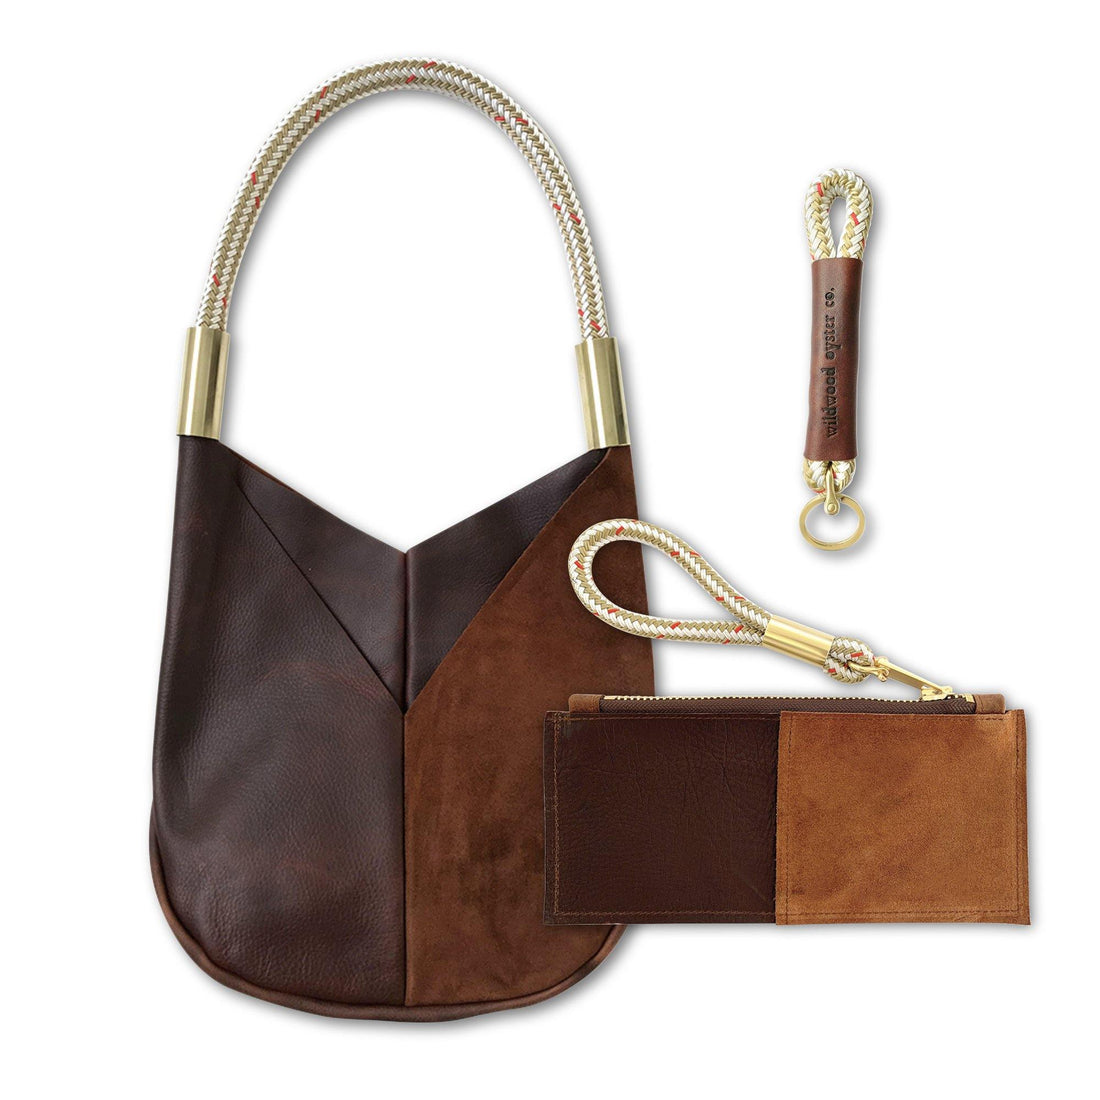 Wildwood Original Tote: Slouchy Hobo Leather Tote Bag with Rope Handle ...